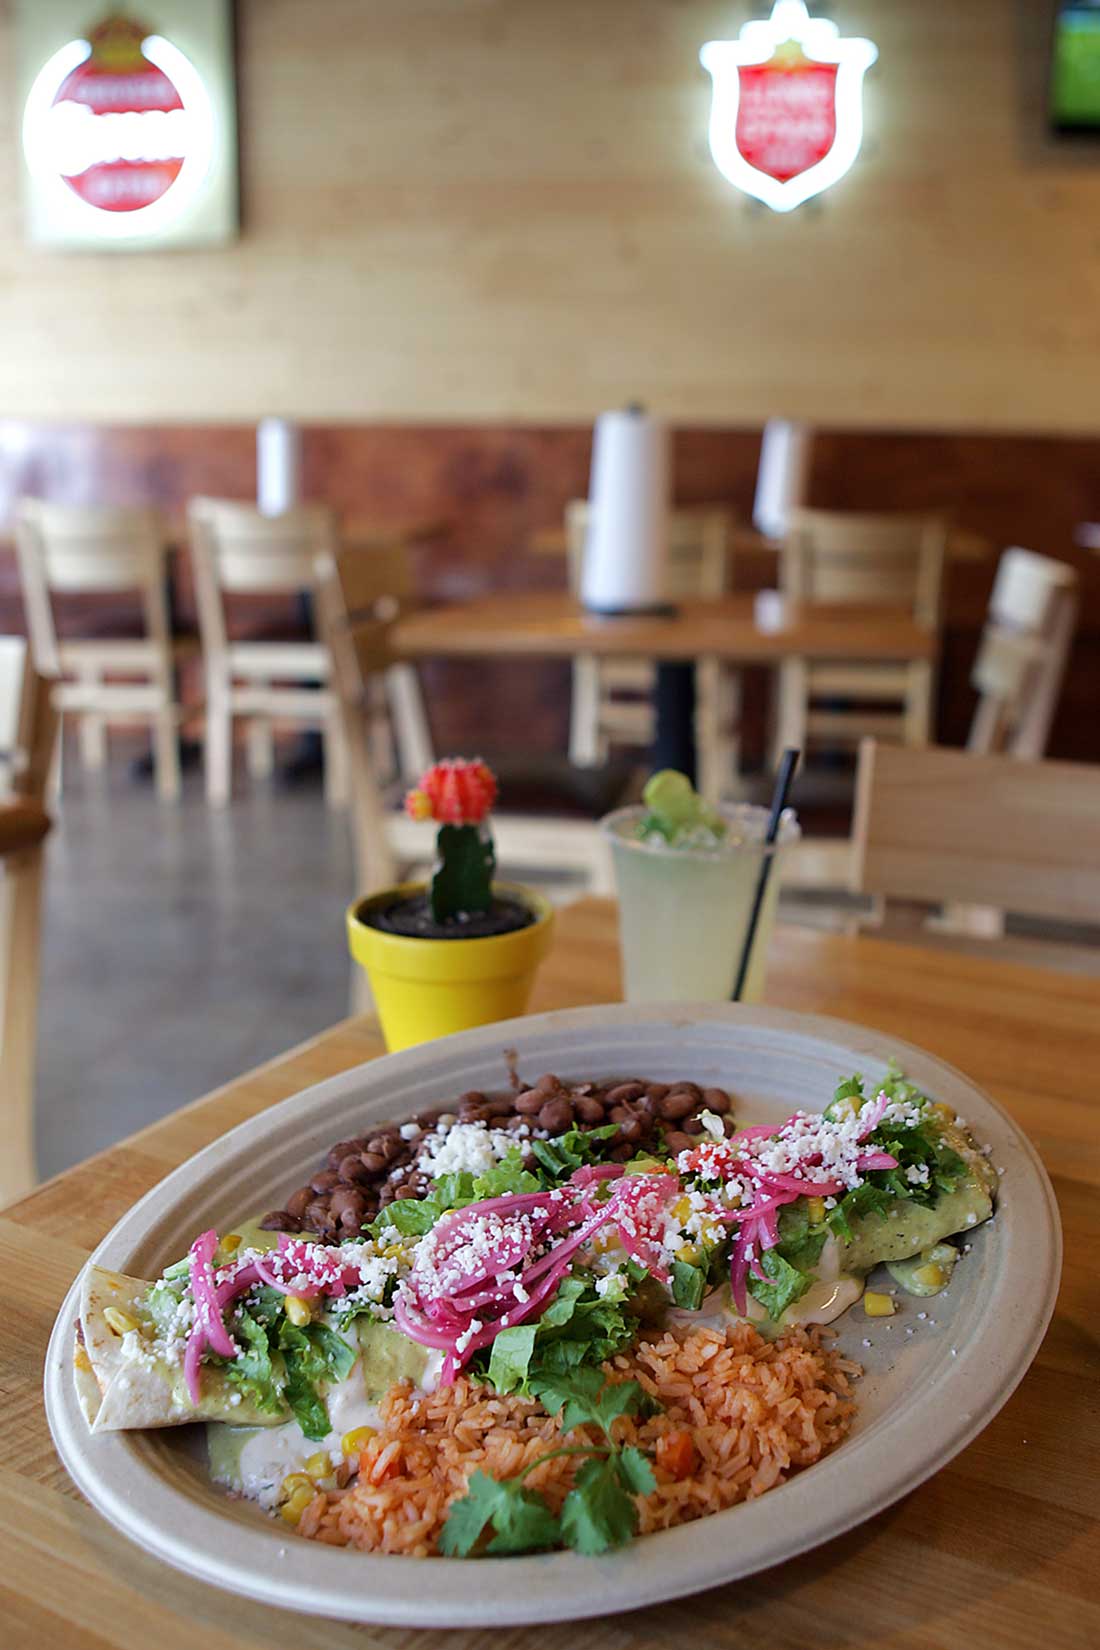 As Pegaso’s namesake enchilada indicates, there’s a whole lot of food here. Lee Chastain